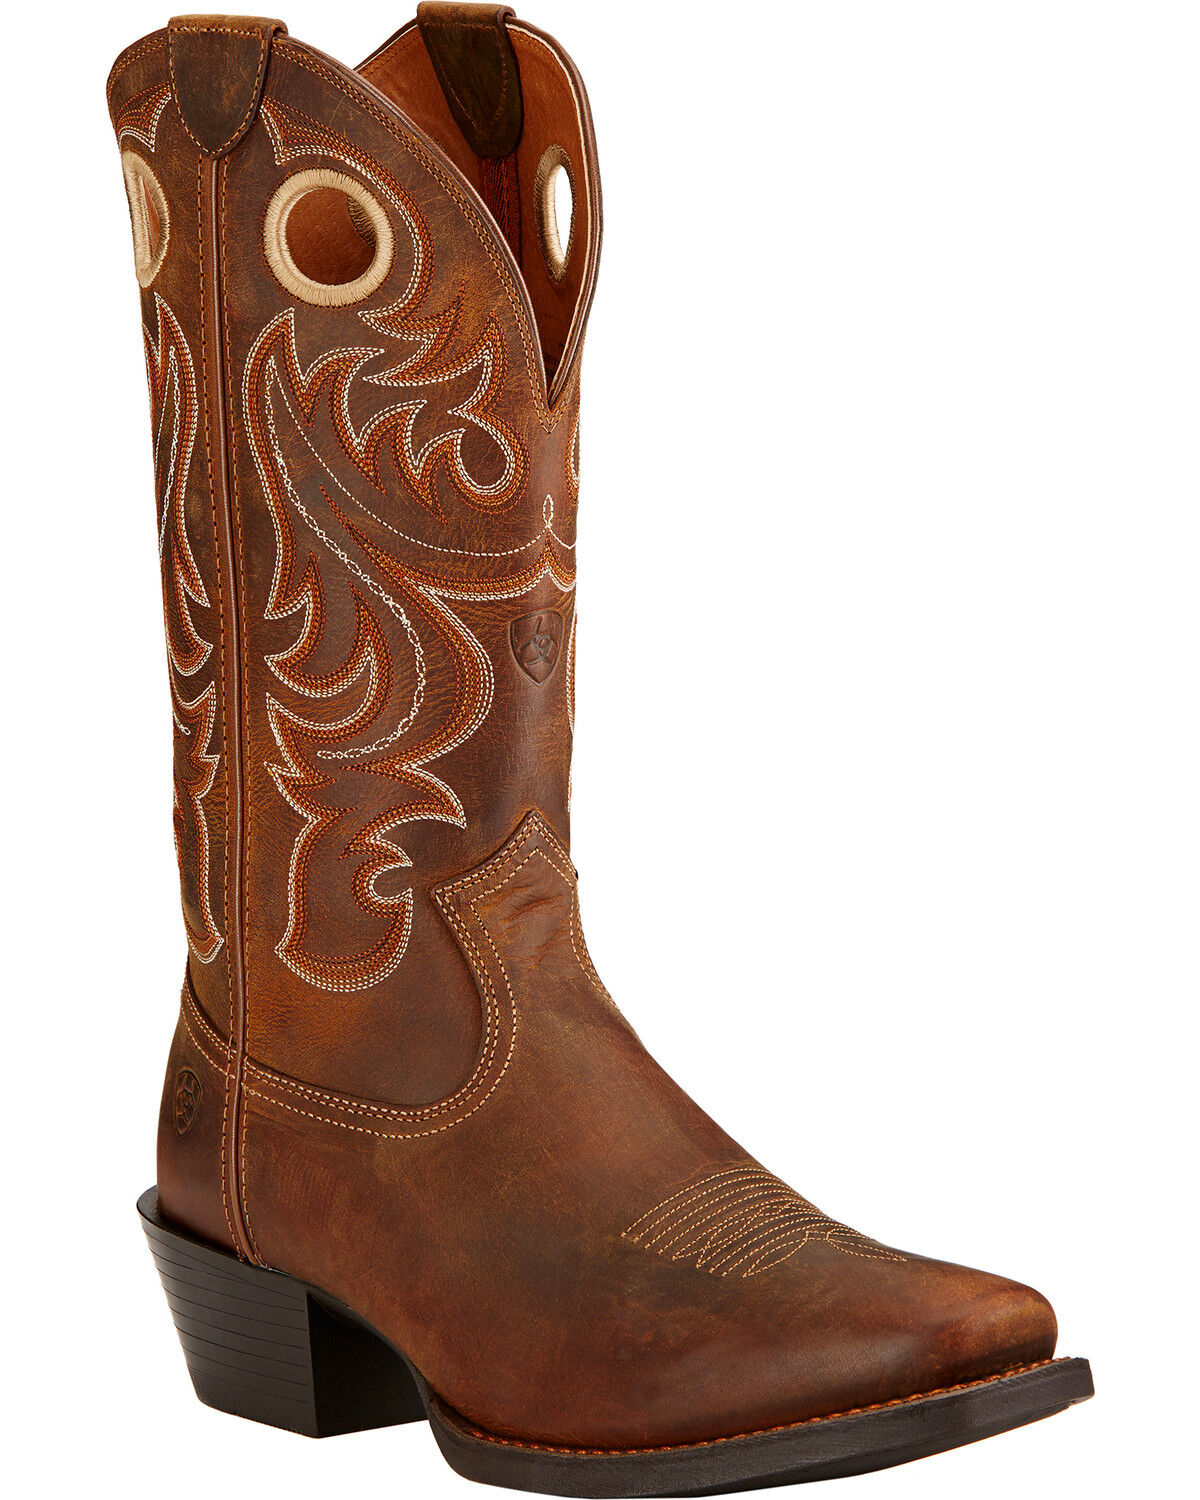 Sport Square Toe Western Boots | Boot Barn